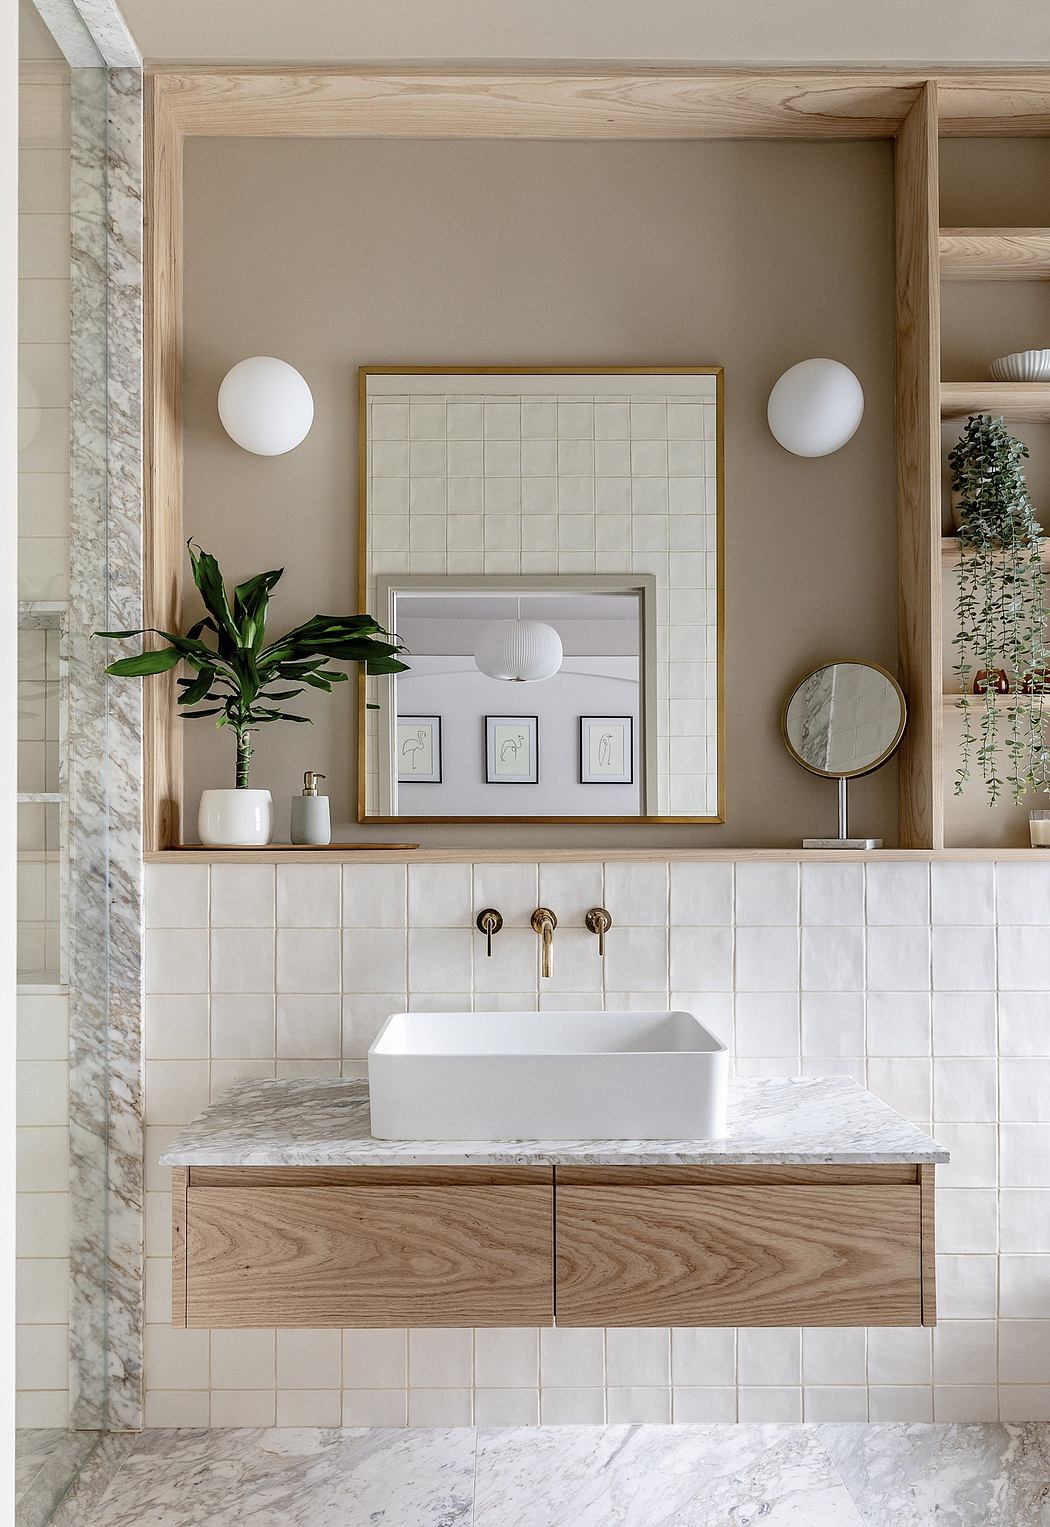 Elegant bathroom with wooden vanity, white basin, brass taps, and framed mirror